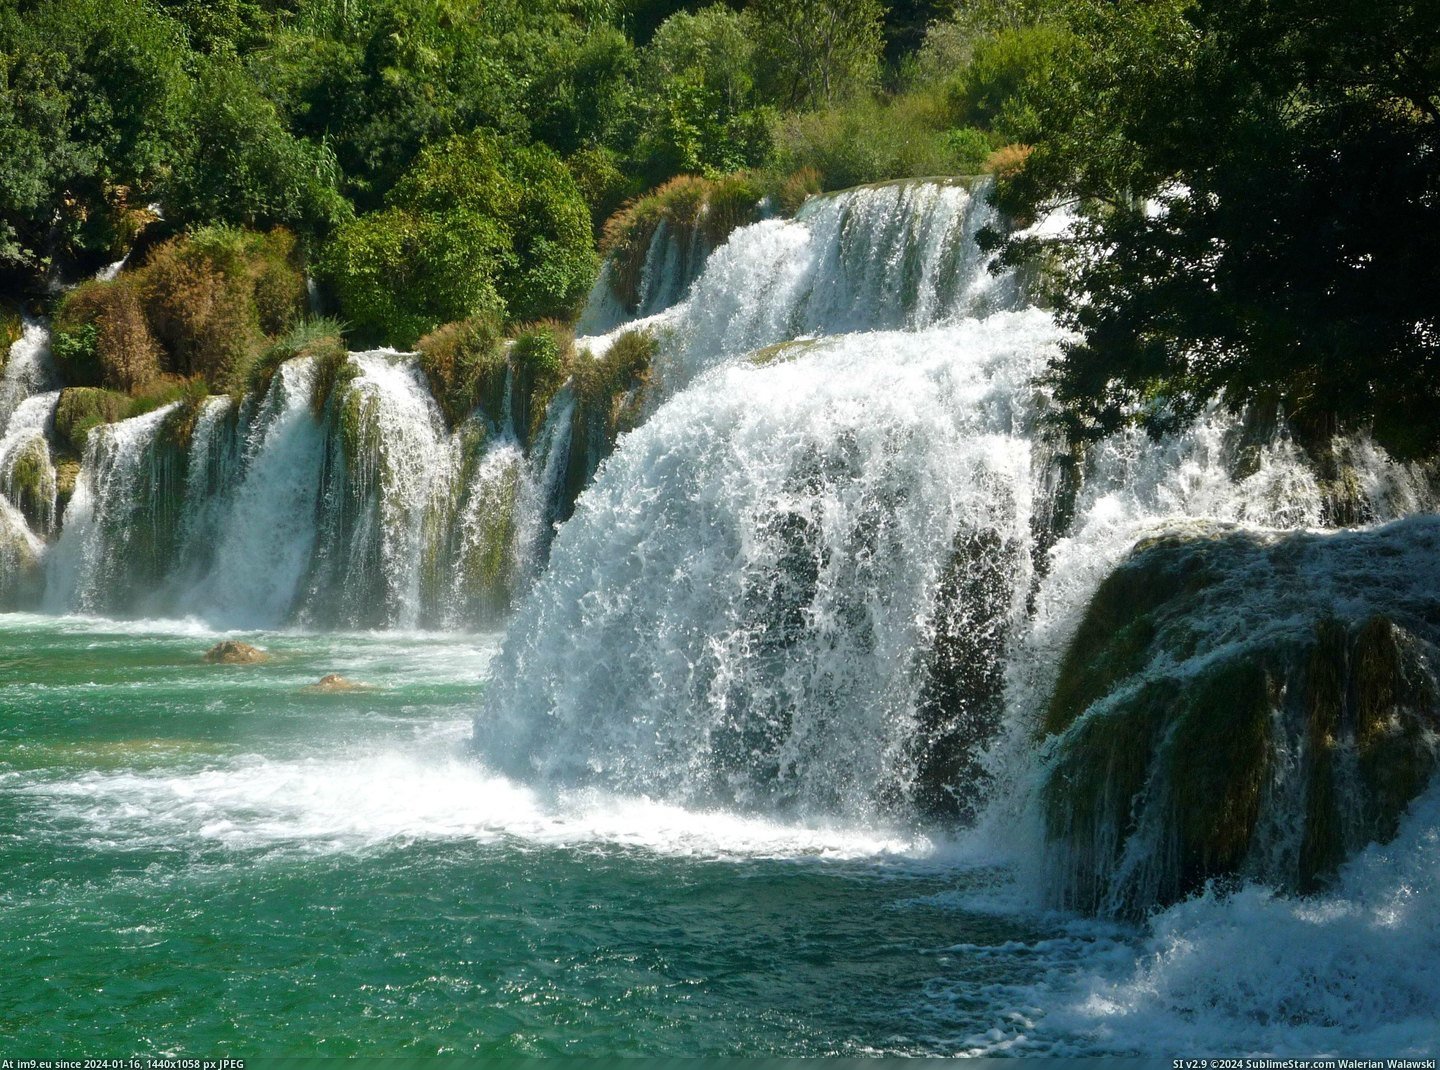 #Park #Beautiful #Croatia #Waterfalls #World #National [Earthporn] Croatia has some of the most beautiful waterfalls in the world (Krka National Park) [OC] [2736 x 2022] Pic. (Изображение из альбом My r/EARTHPORN favs))